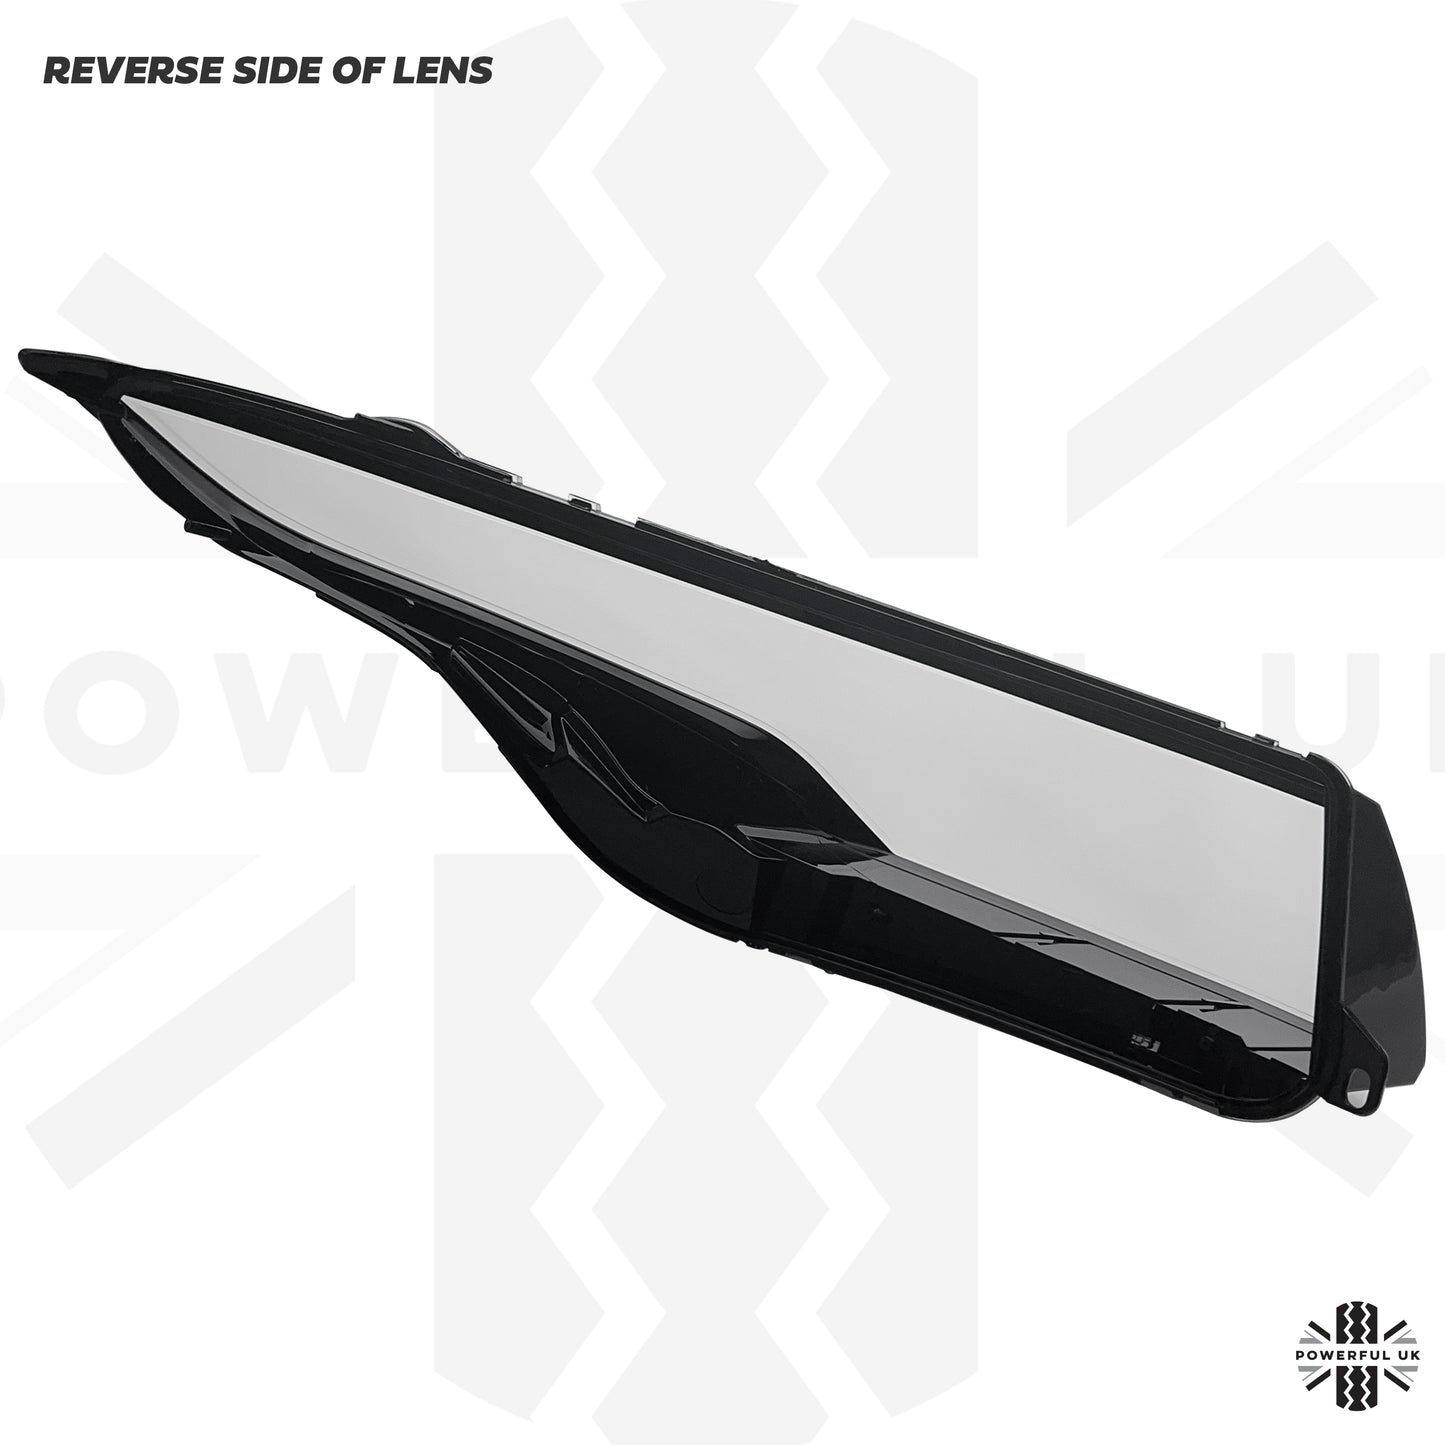 Replacement Headlight Lens for Range Rover Evoque 1 - LH